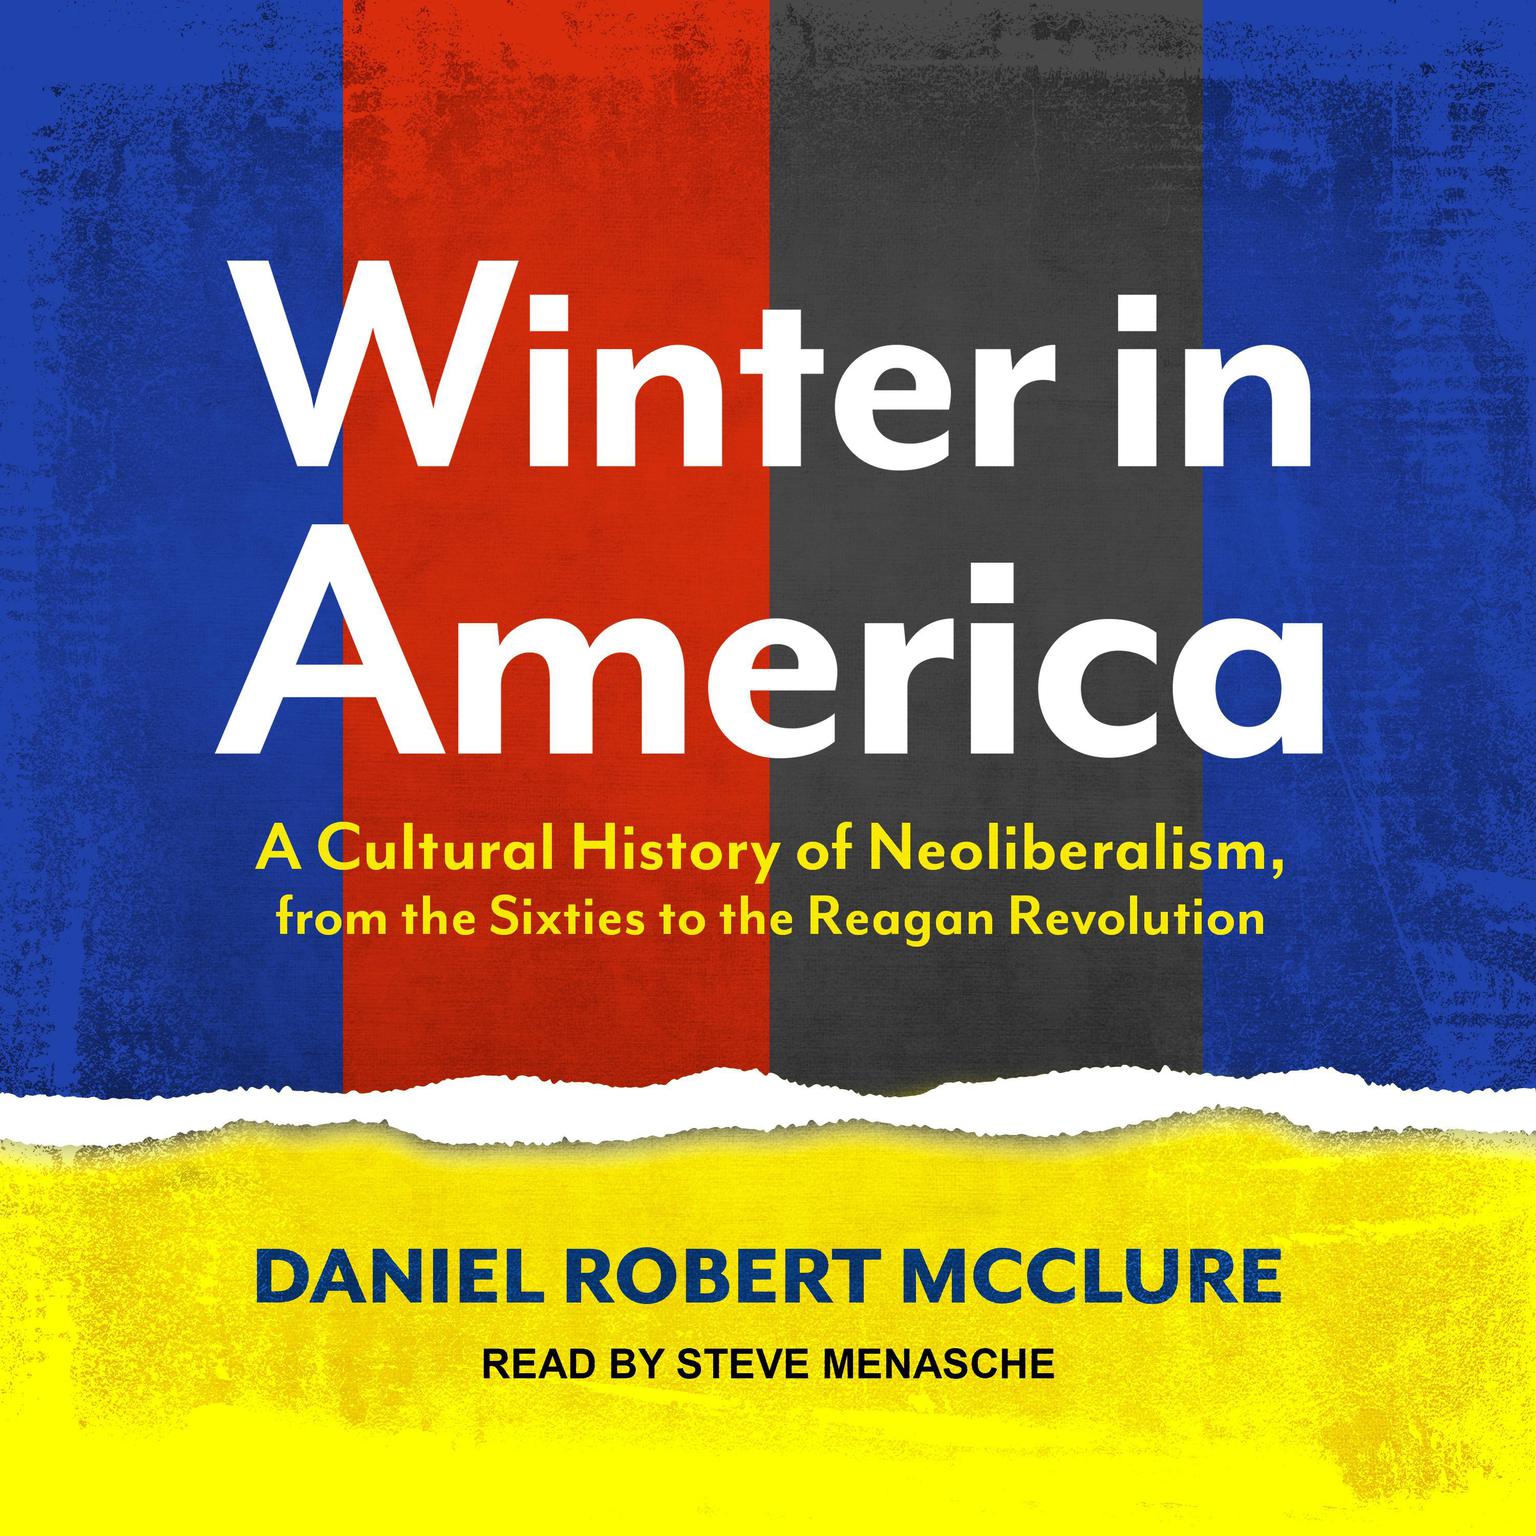 Winter in America: A Cultural History of Neoliberalism, from the Sixties to the Reagan Revolution Audiobook, by Daniel Robert McClure